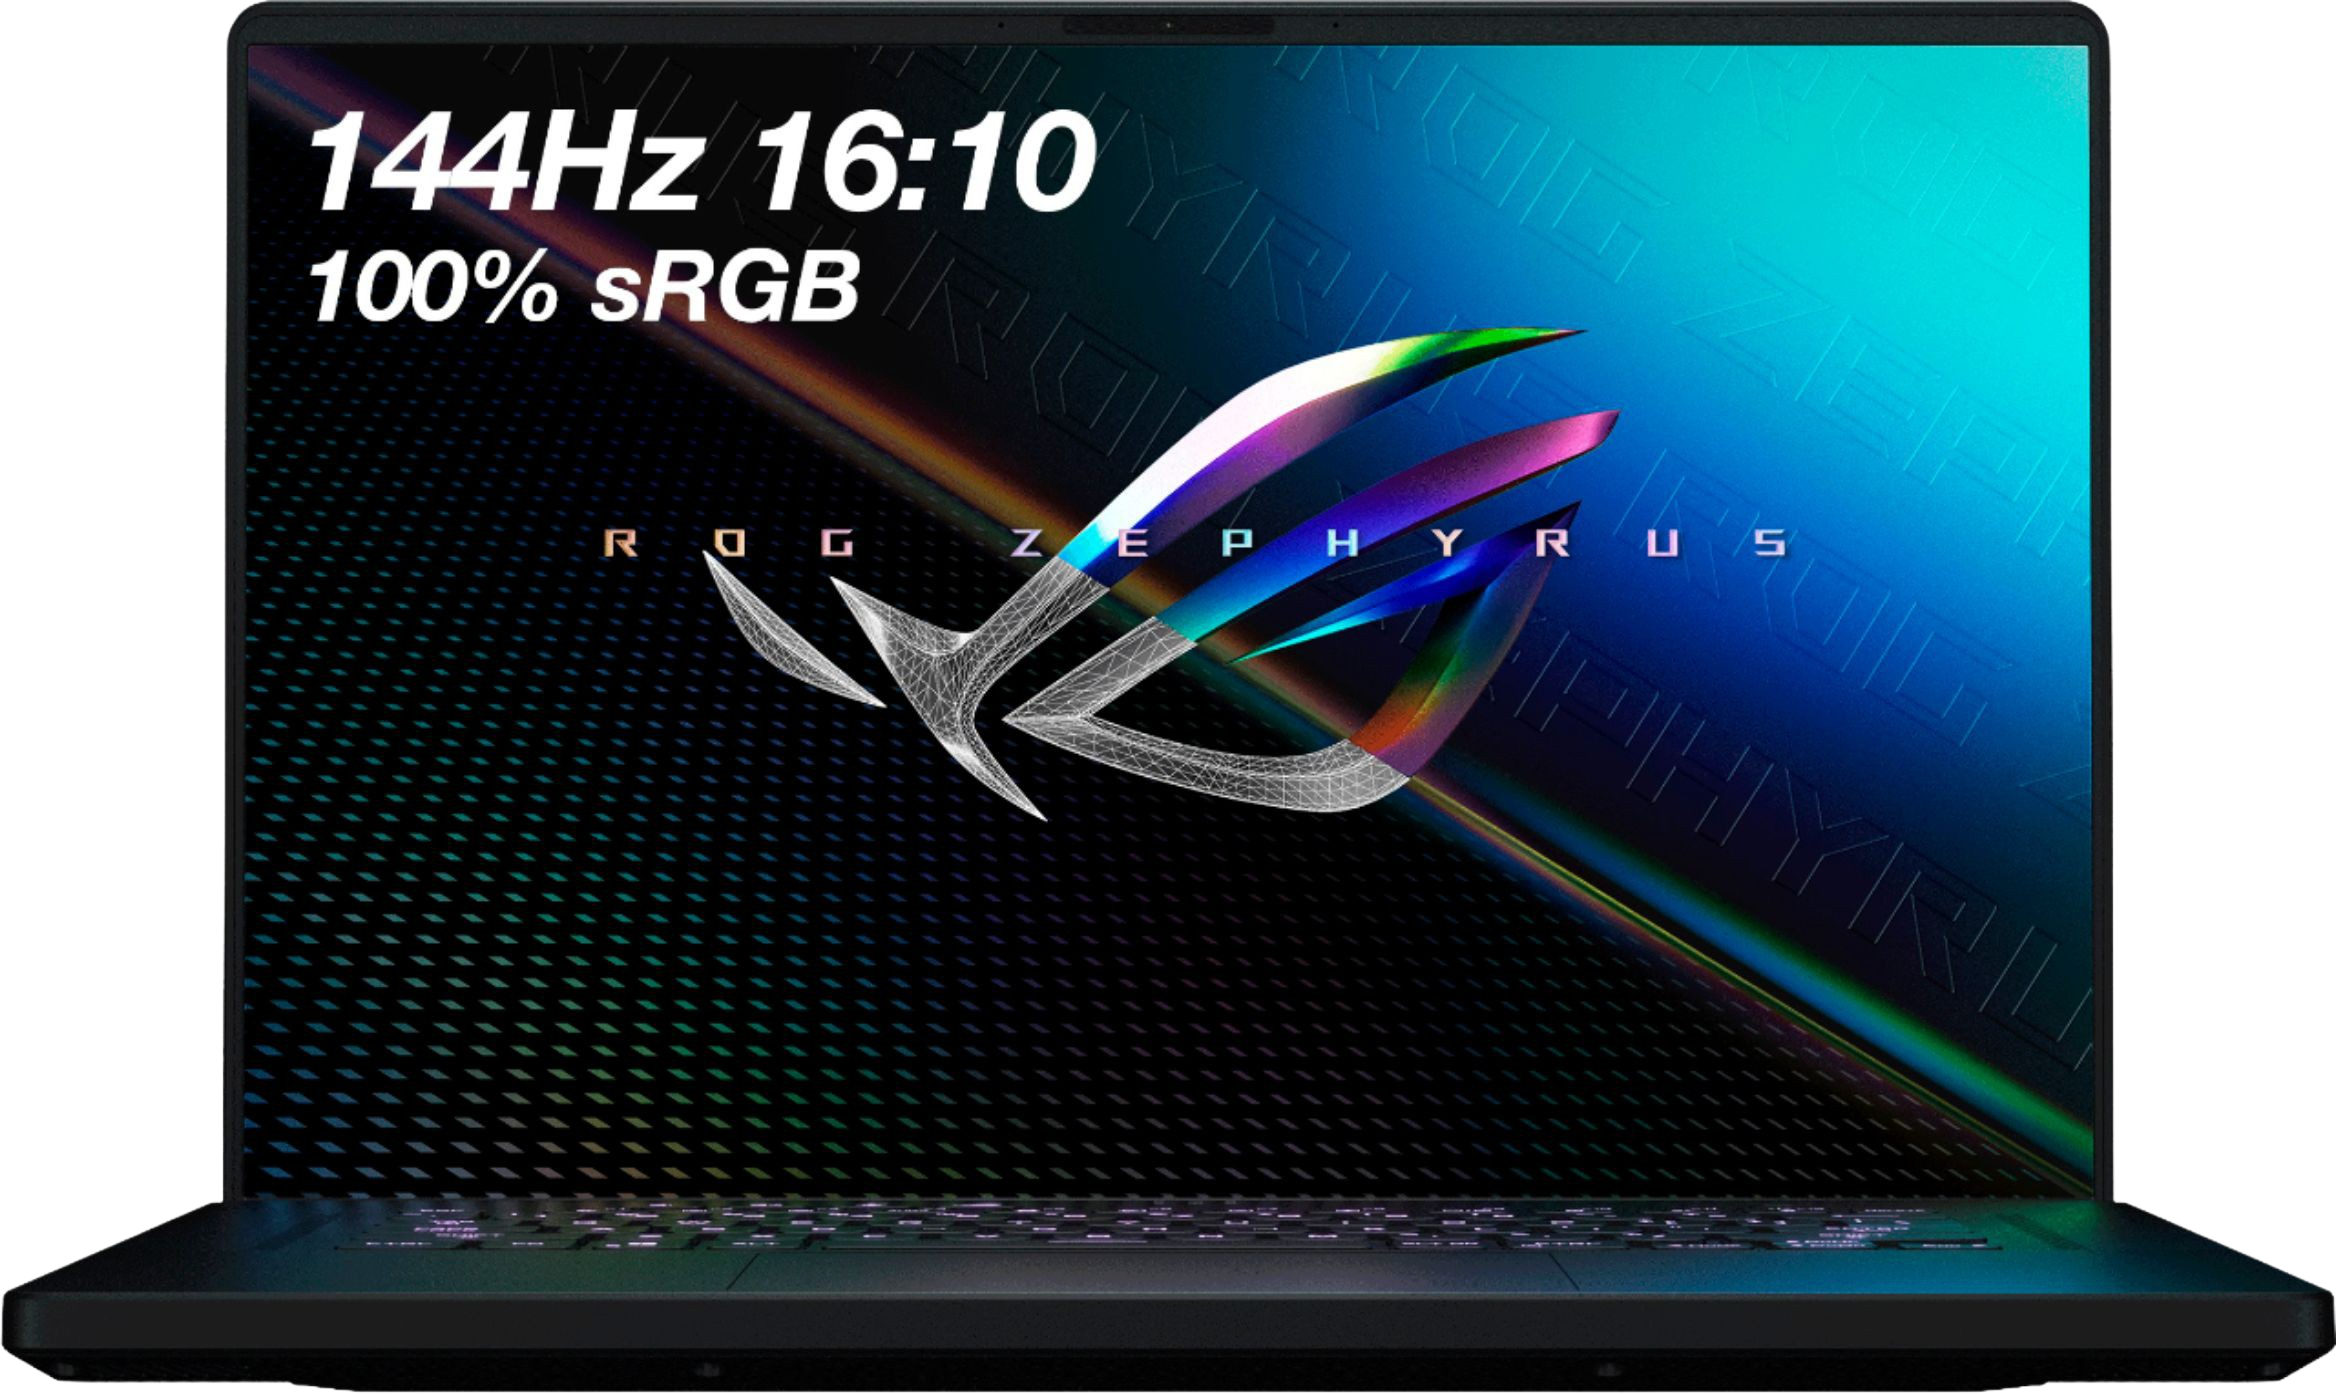 Asus ROG Ally: Where to buy, specs & performance - Dexerto